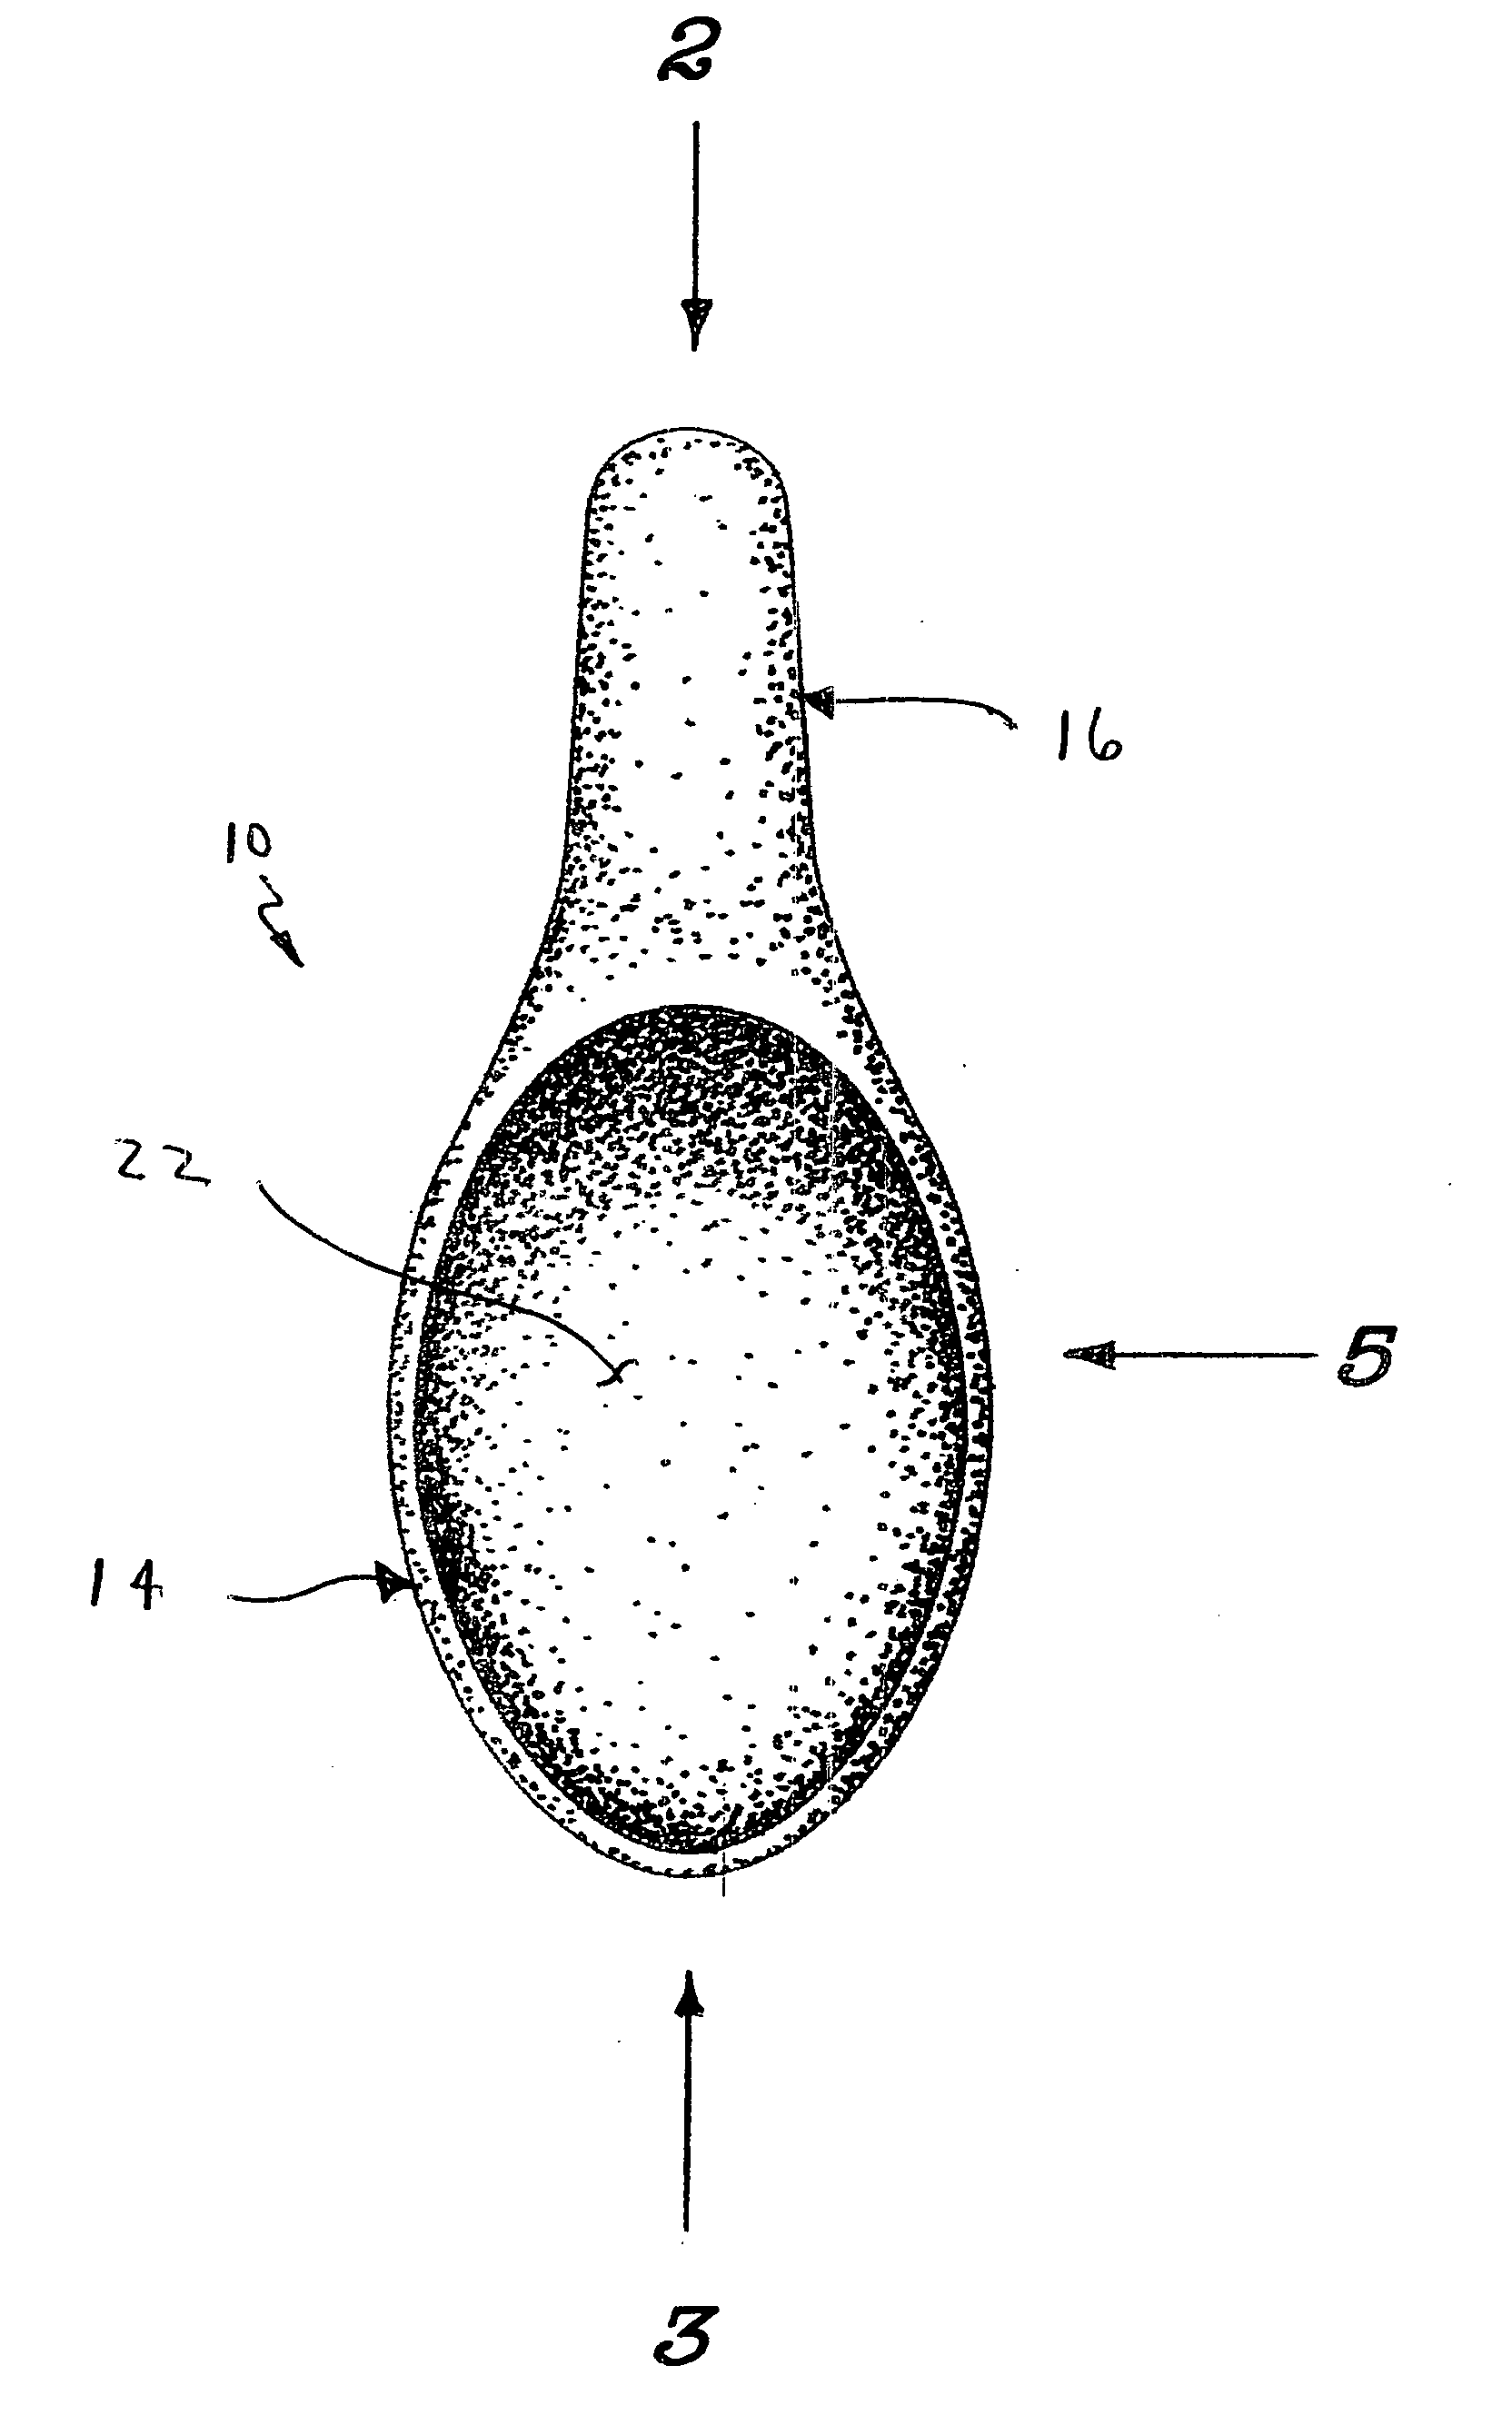 Edible spoon for dissociating into consumable predetermined clumps in order to prevent dissociating into random granules that would make consumption more difficult